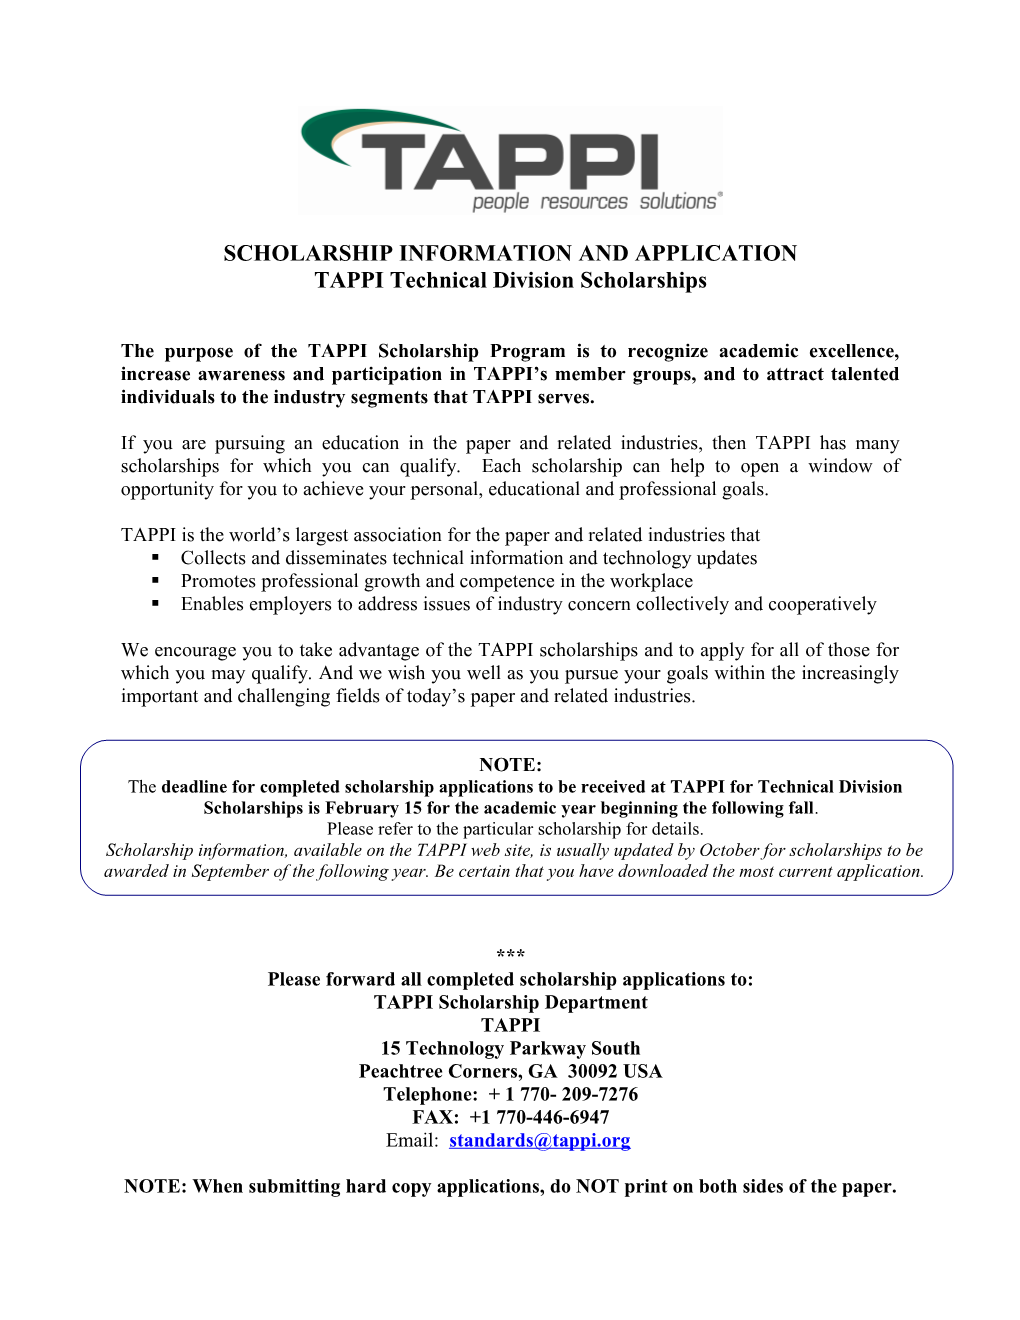 TAPPI Technical Division Scholarships